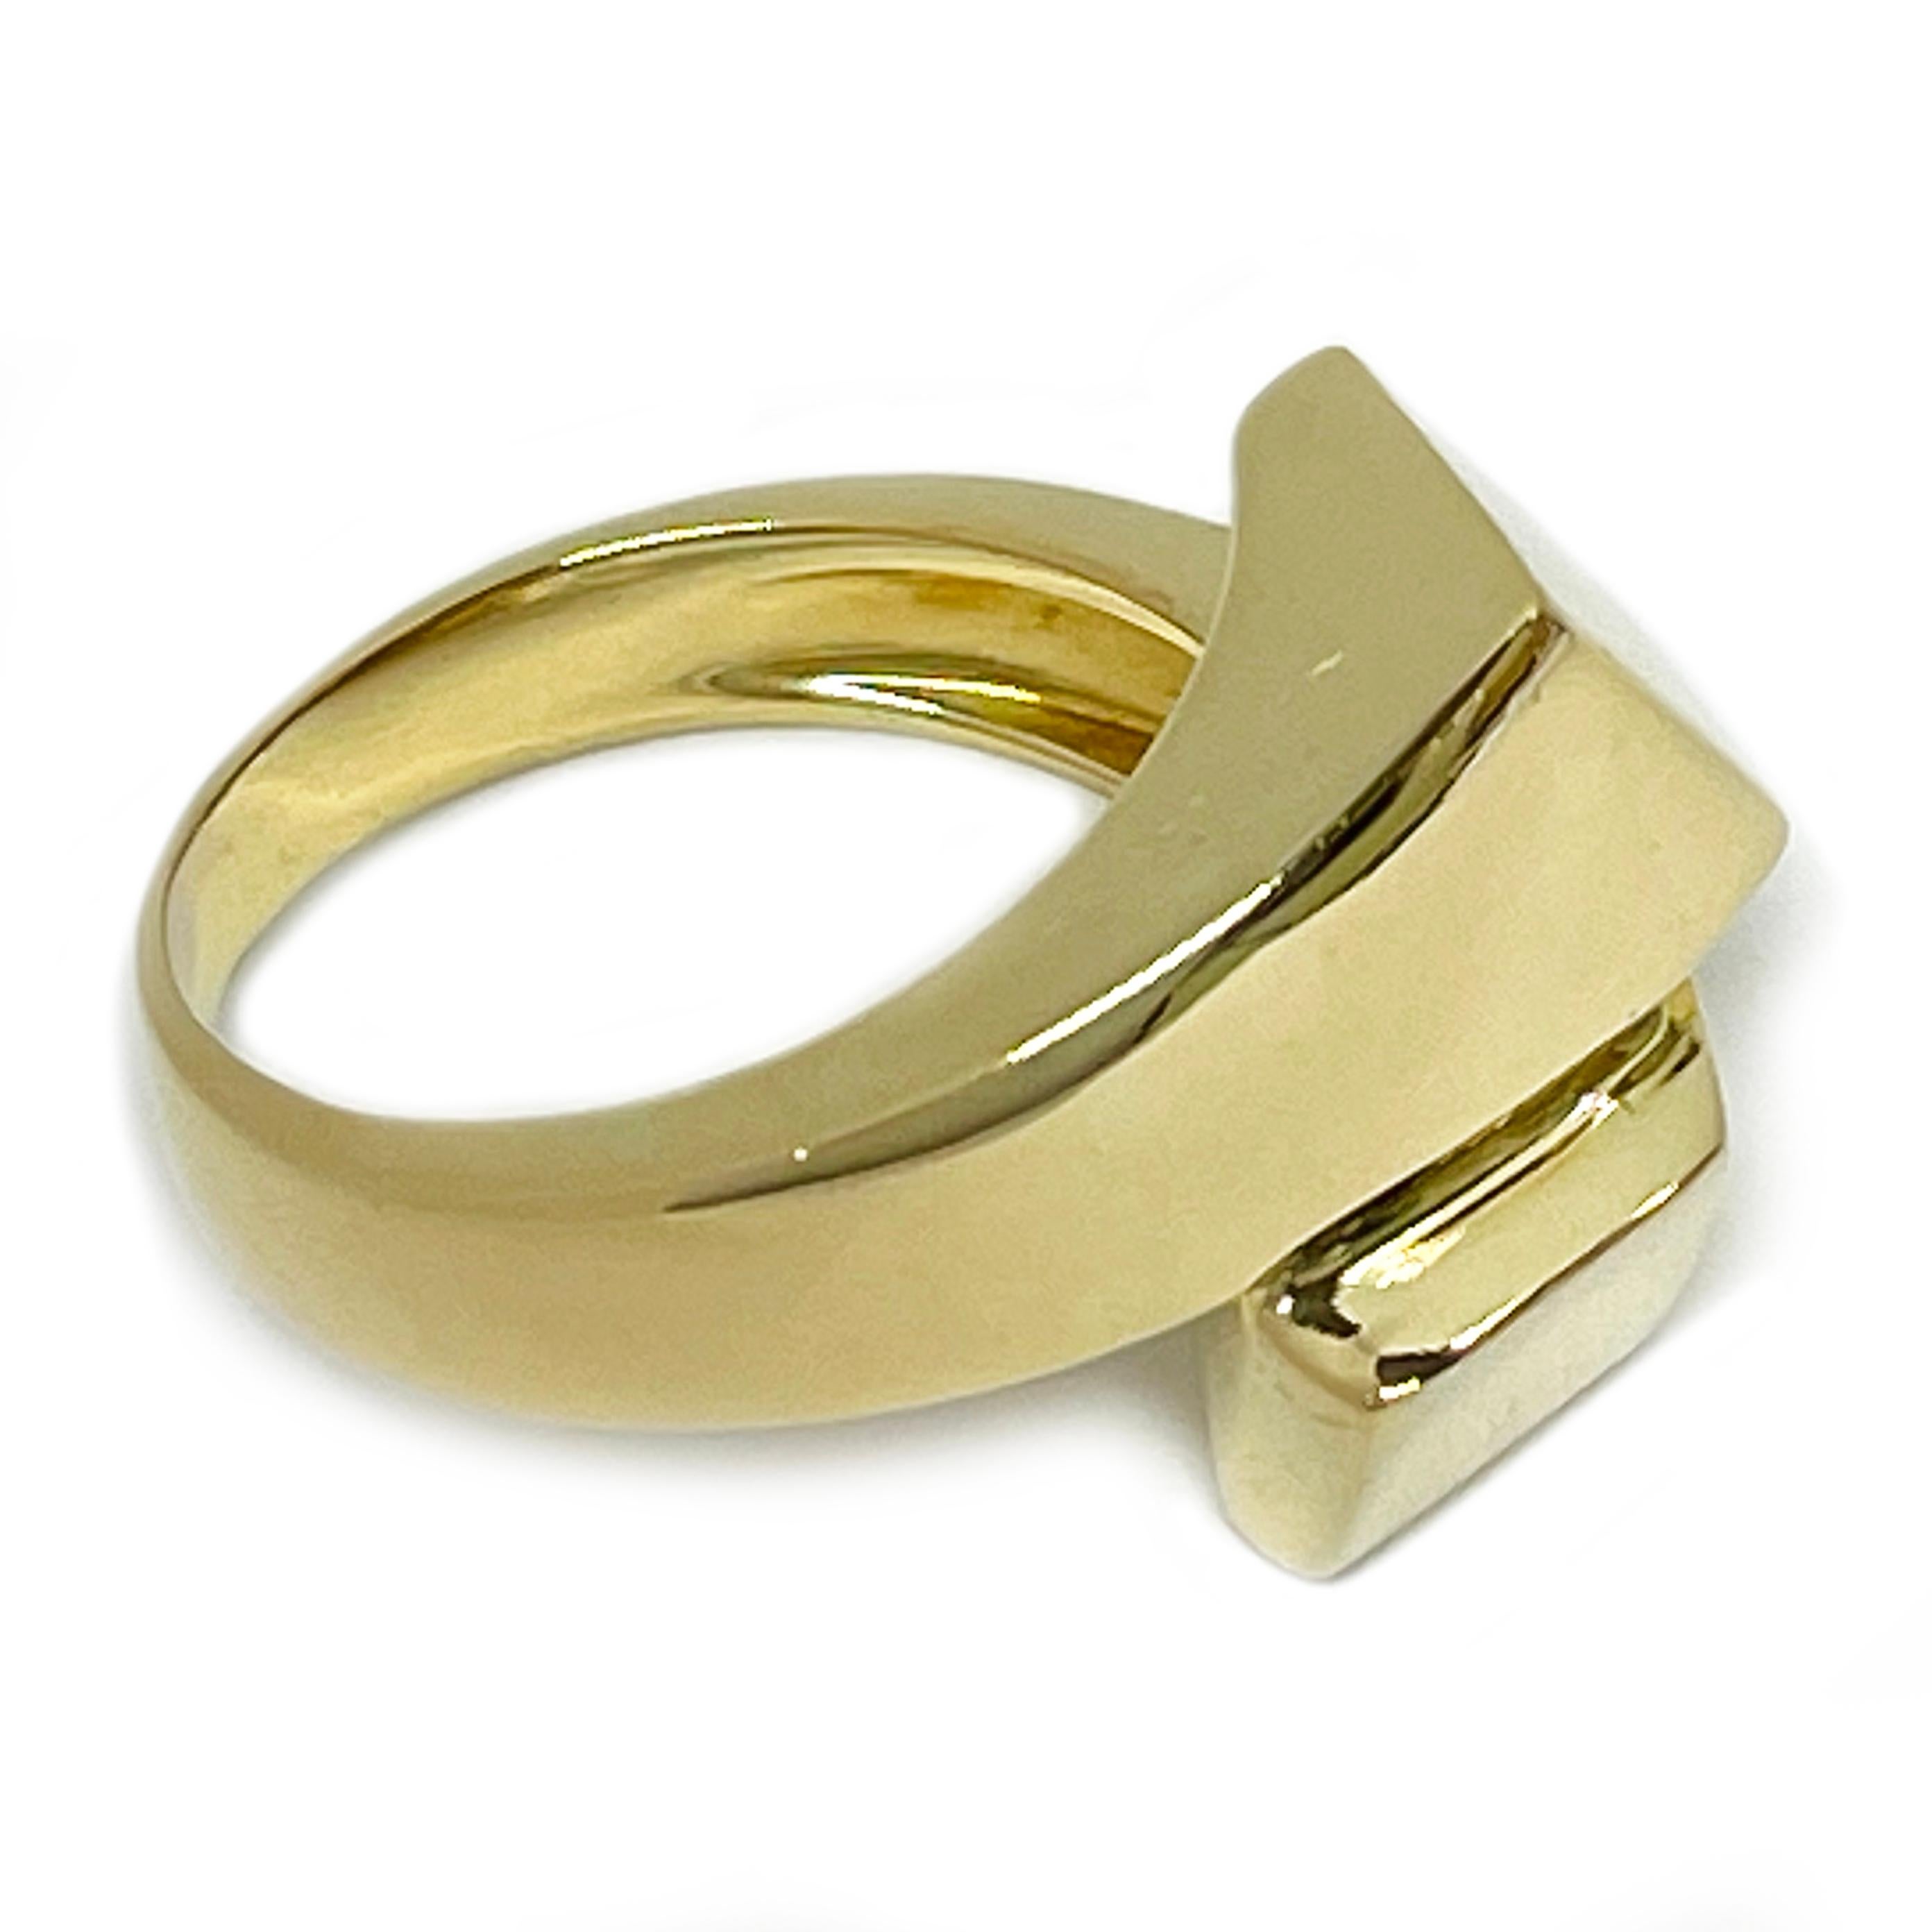 18 Karat Yellow Gold Bypass Ring. The ring features two gold tube-like sections in a bypass form in the front part of the ring. Stamped on the inside of the band is (star) 314 VI Le-Gi 750 and Le-Gi's sun and rays logo. The VI marking means the ring